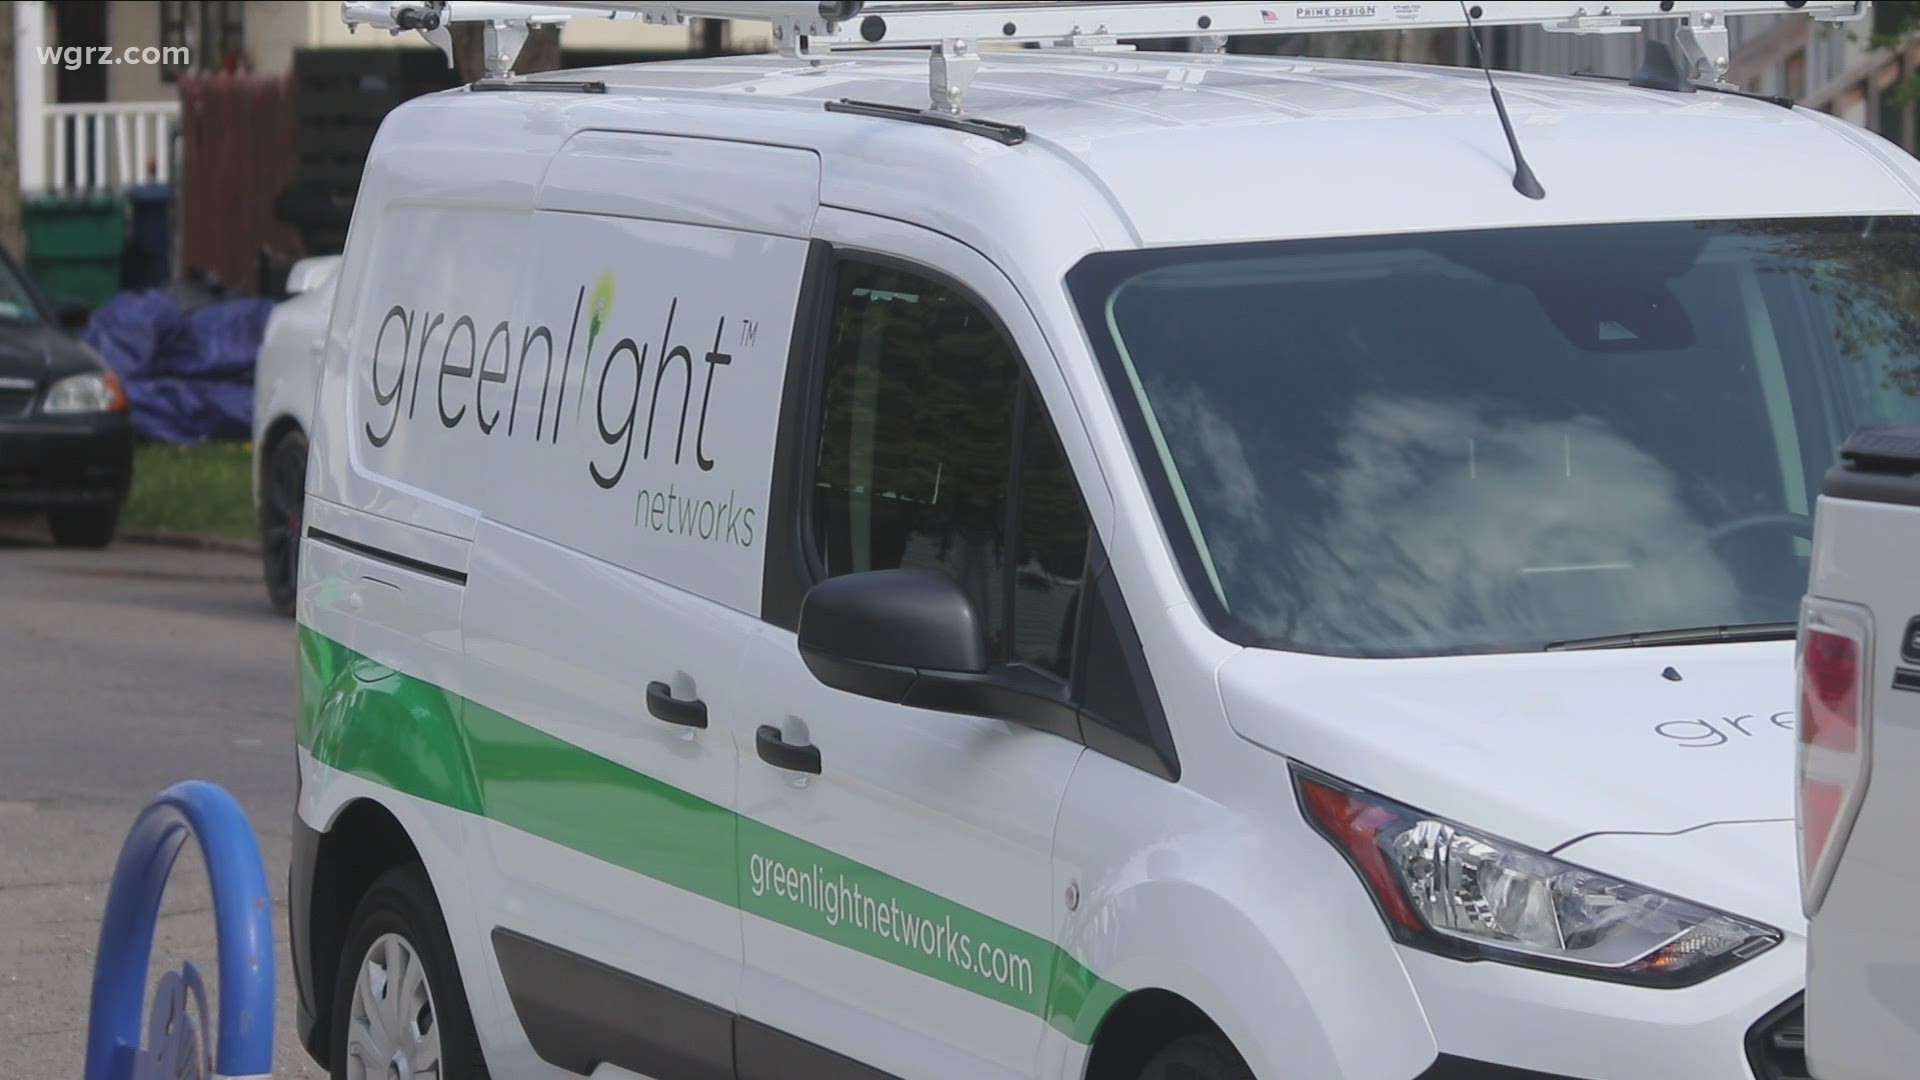 Greenlight to expand broadband coverage in Buffalo